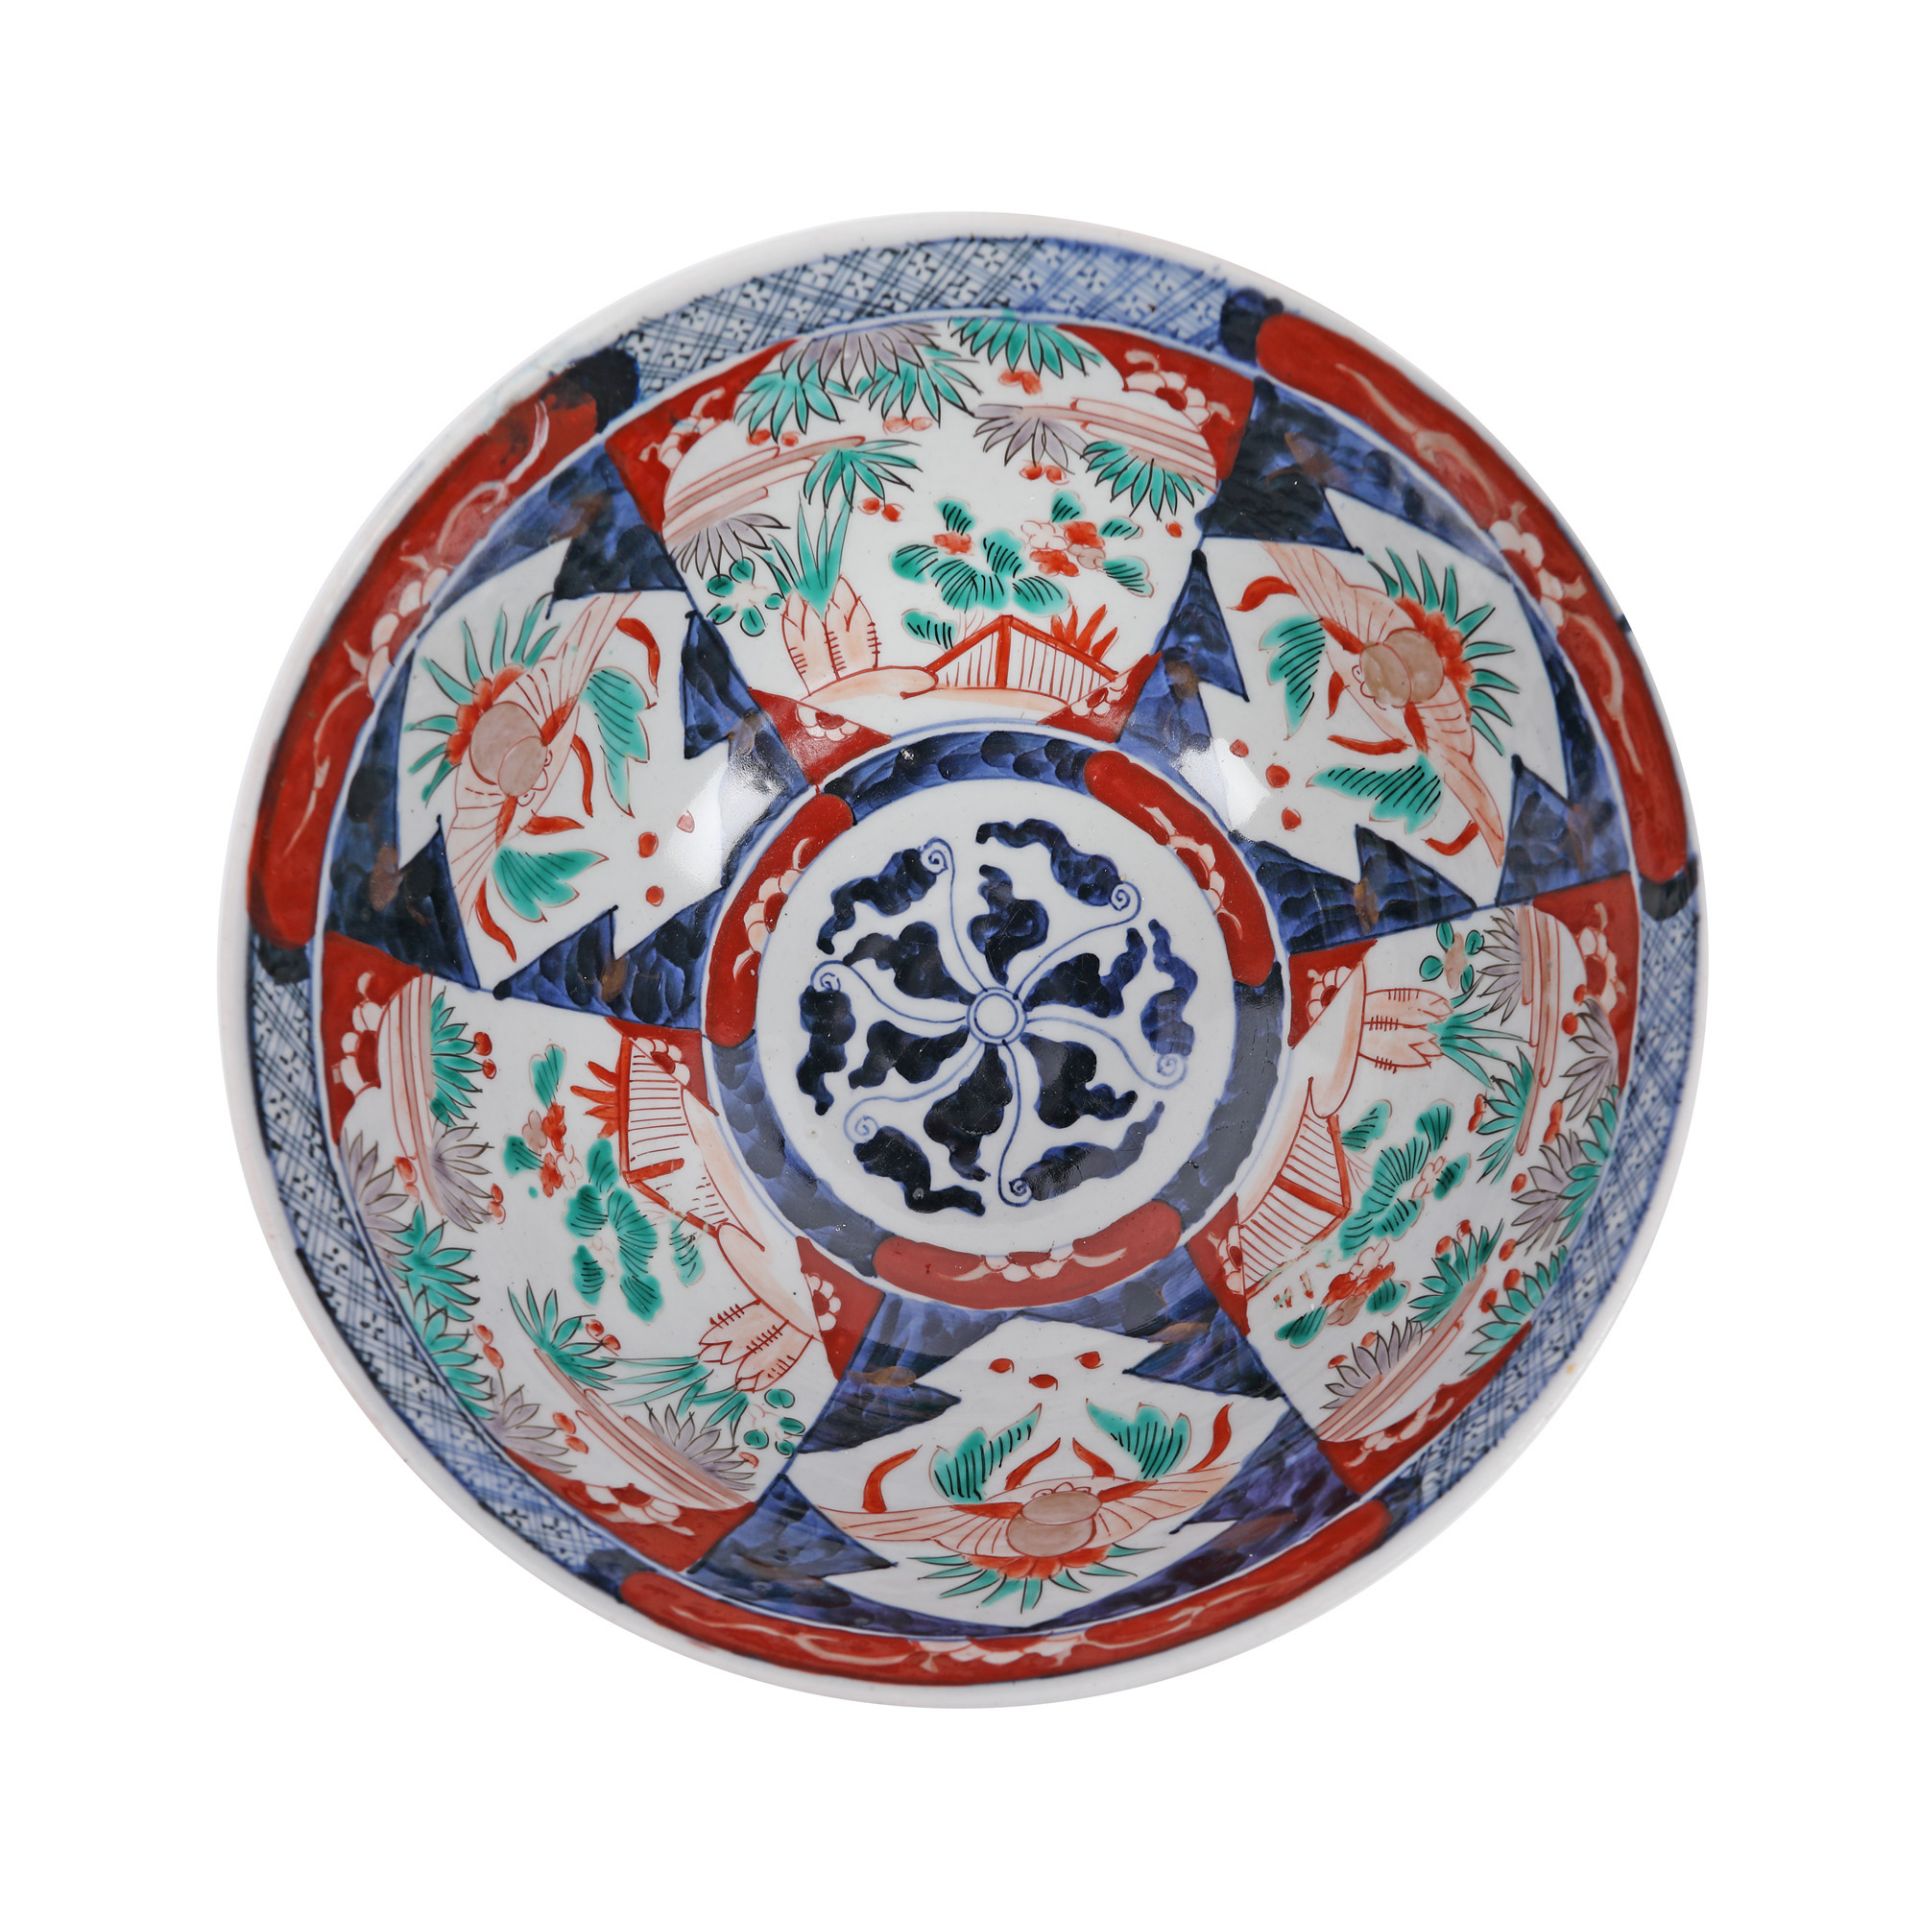 Imari vessel made of porcelain, decorated with lacustrine landscapes, the Meiji period, Japan, start - Image 2 of 3